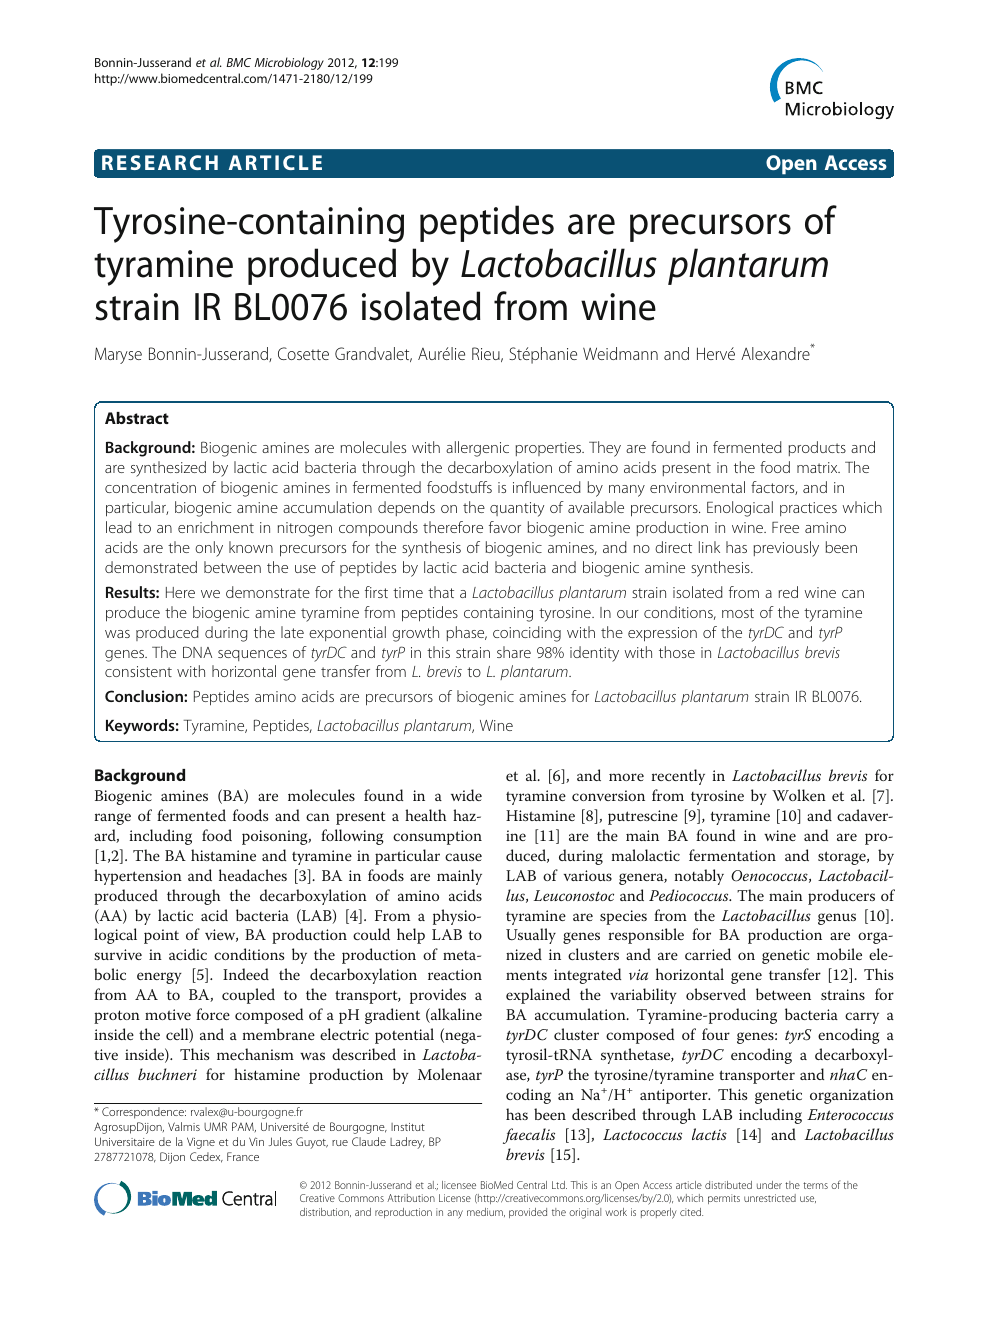 Tyrosine Containing Peptides Are Precursors Of Tyramine Produced By Lactobacillus Plantarum Strain Ir Bl0076 Isolated From Wine Topic Of Research Paper In Biological Sciences Download Scholarly Article Pdf And Read For Free